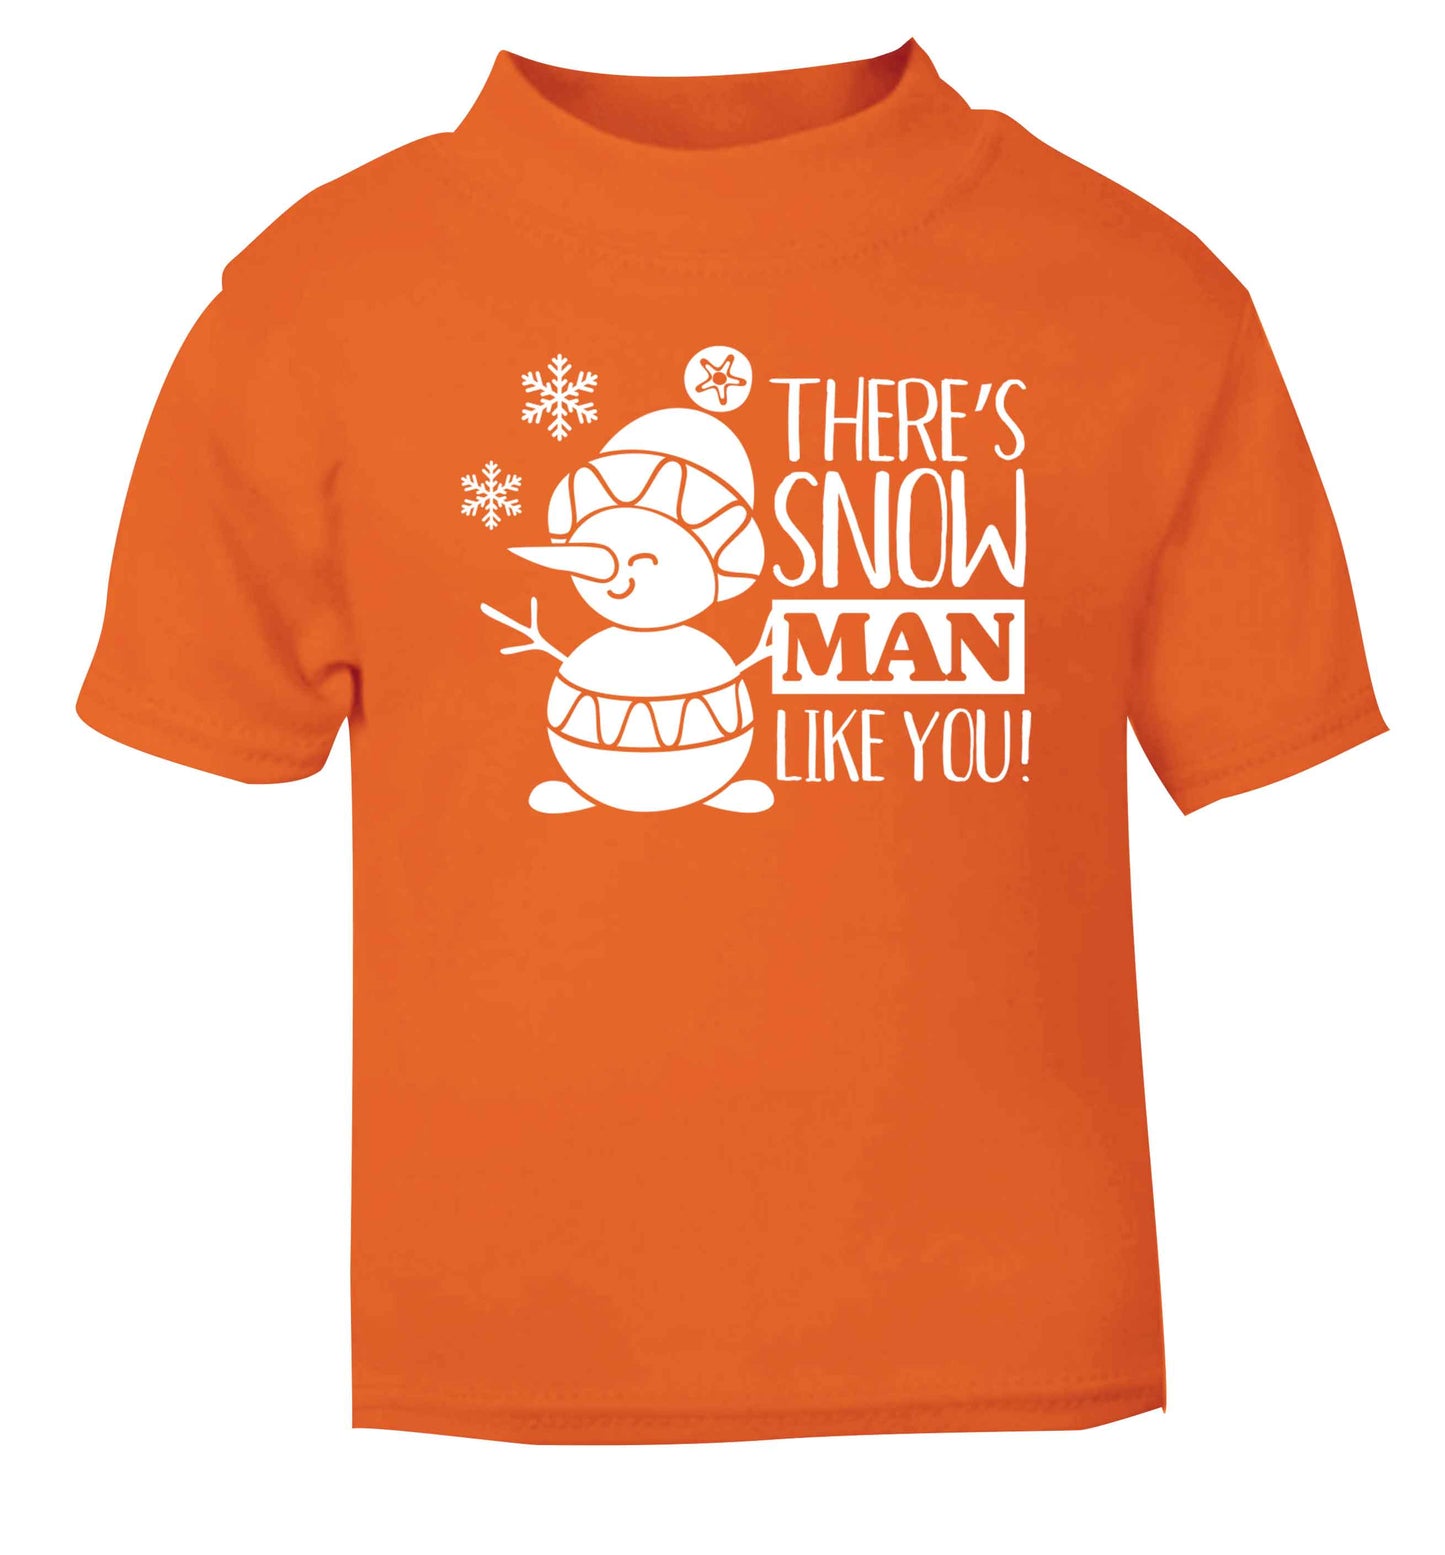 There's snow man like you orange baby toddler Tshirt 2 Years